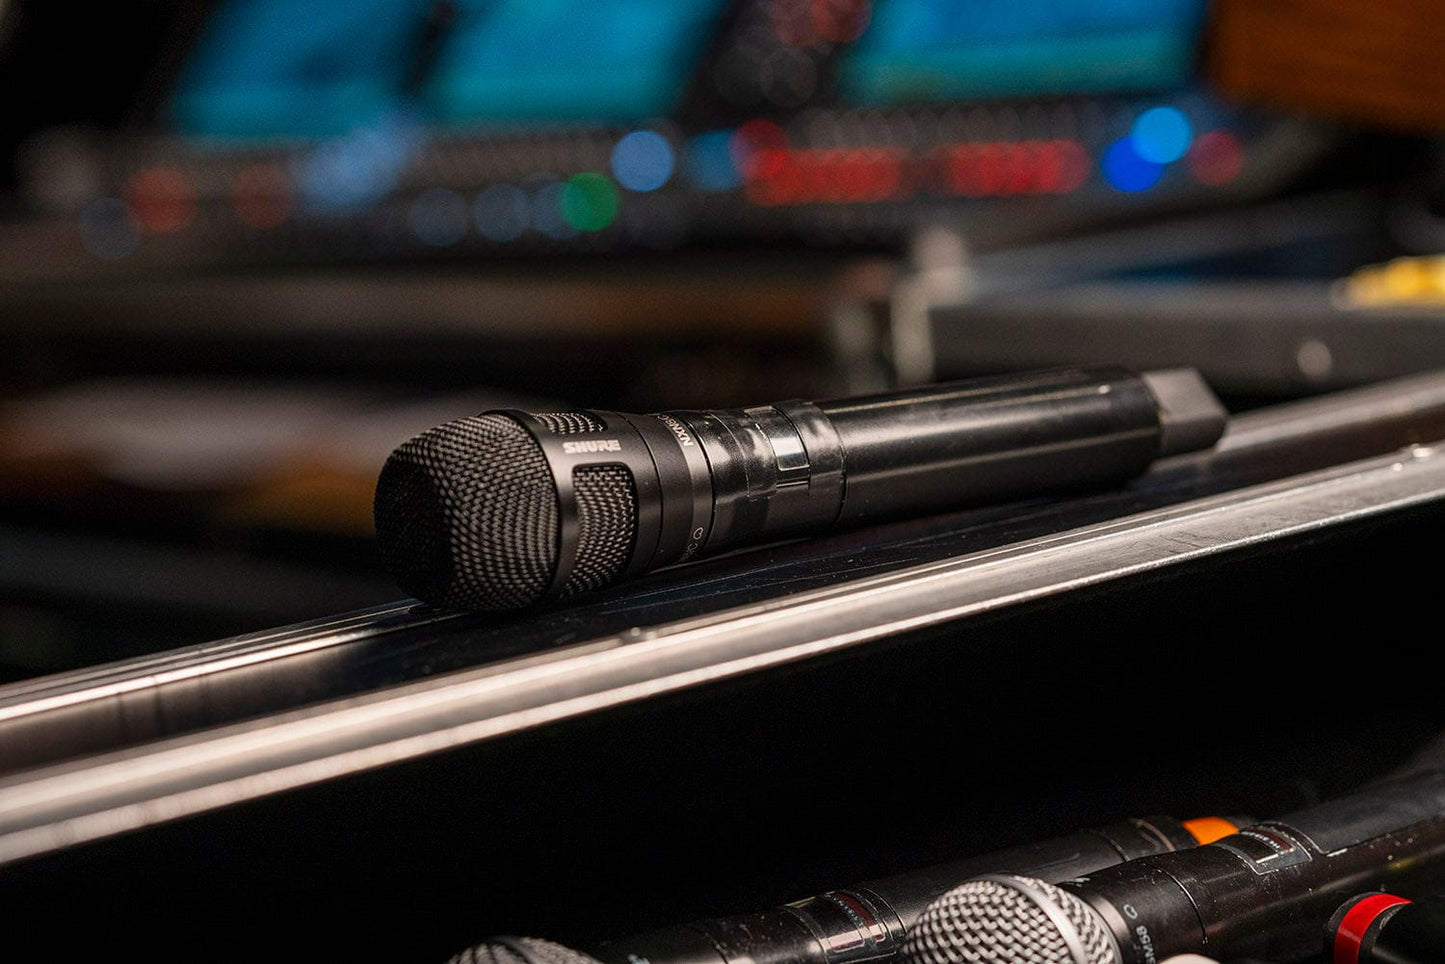 Shure NXN8/C Nexadyne 8/C Cardioid Handheld Vocal Microphone with Revonic Technology - PSSL ProSound and Stage Lighting